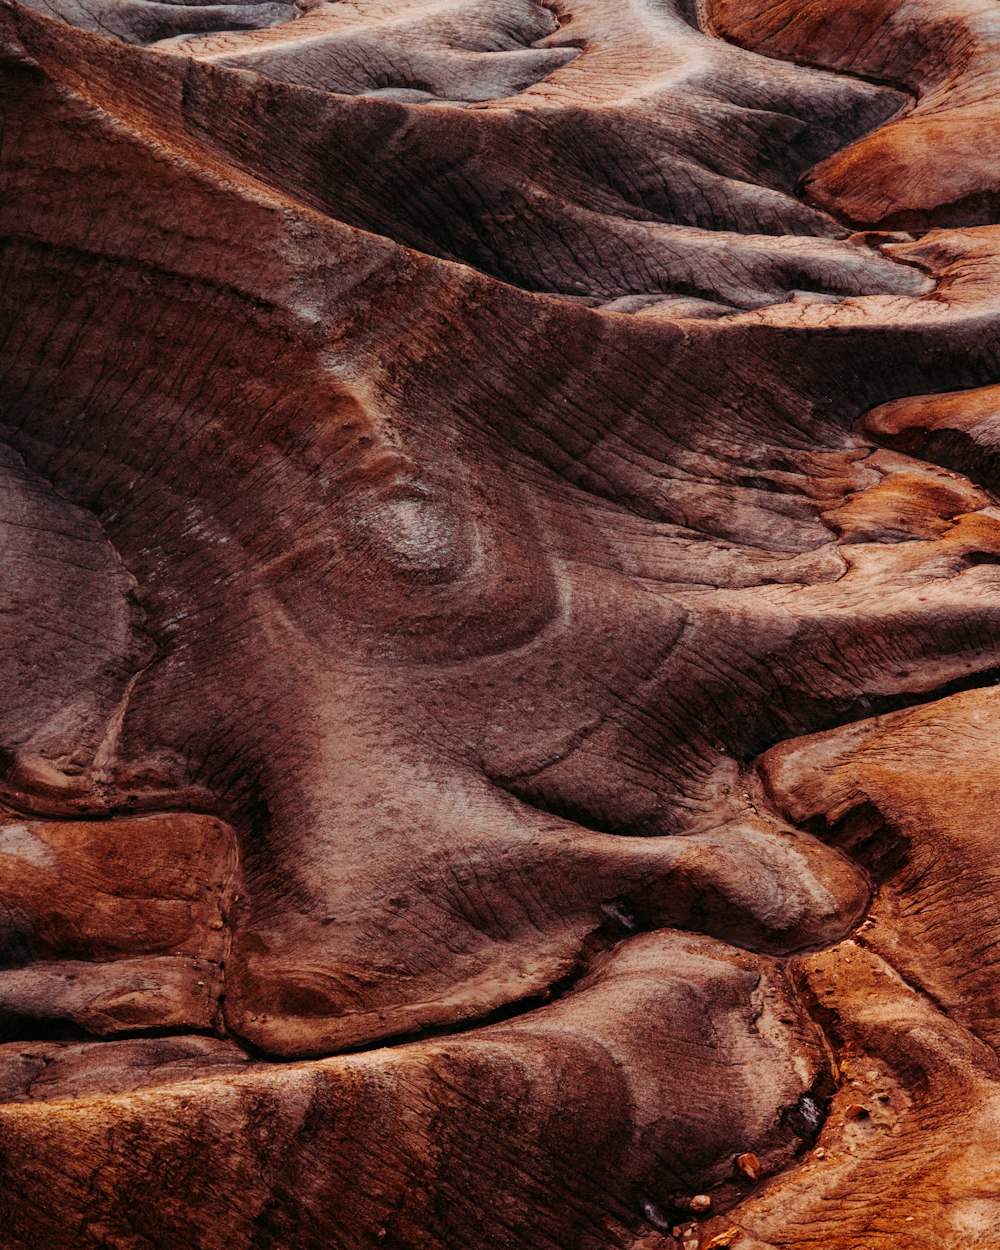 a close up of a rock formation with a bird's eye view